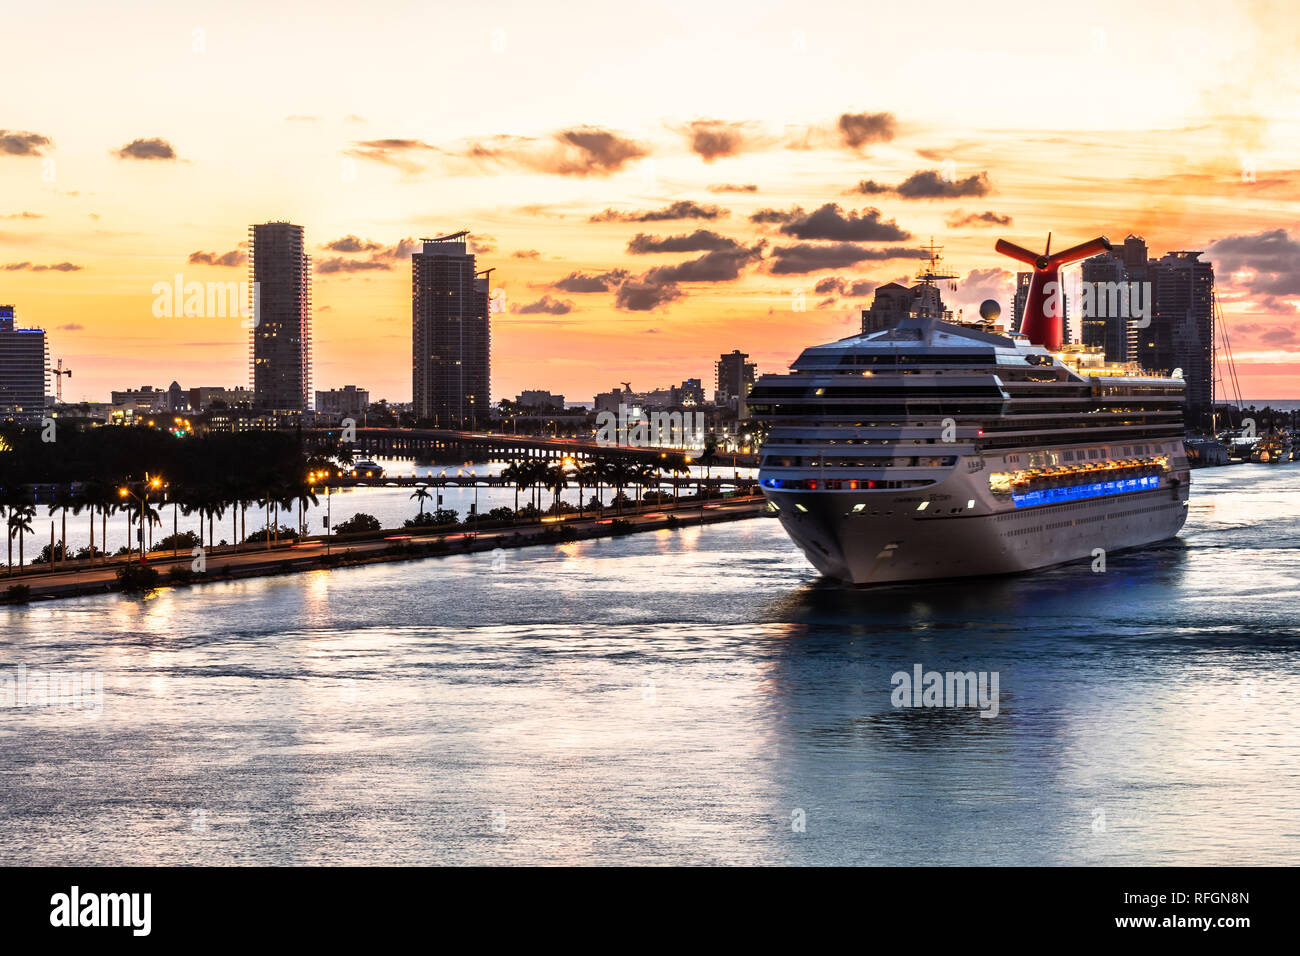 Miami, Florida - November 19 2018: Amazing sunrise skyline view of the city of Miami with Carnival Victory Cruise Ship sailing into the Port of Miami Stock Photo